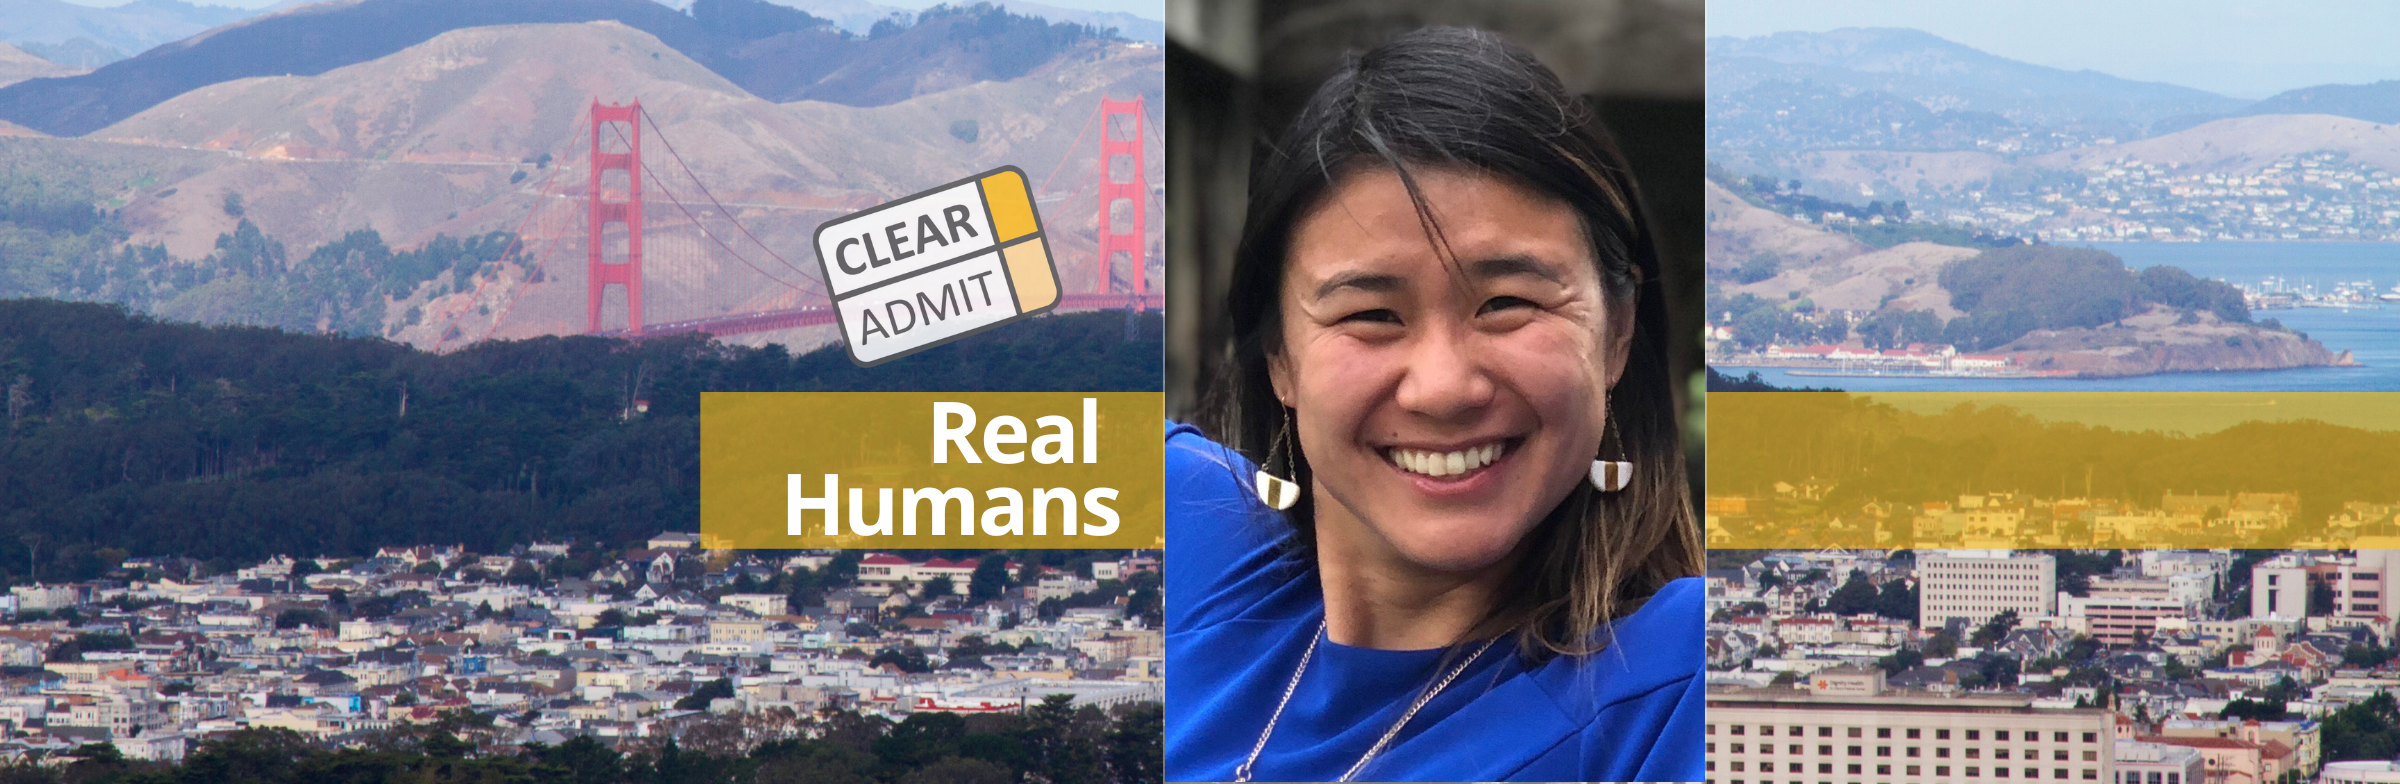 Image for Real Humans of Google: Helen Zou, Stanford GSB MBA/M.Ed. ’18, Product Manager, Education on ChromeOS